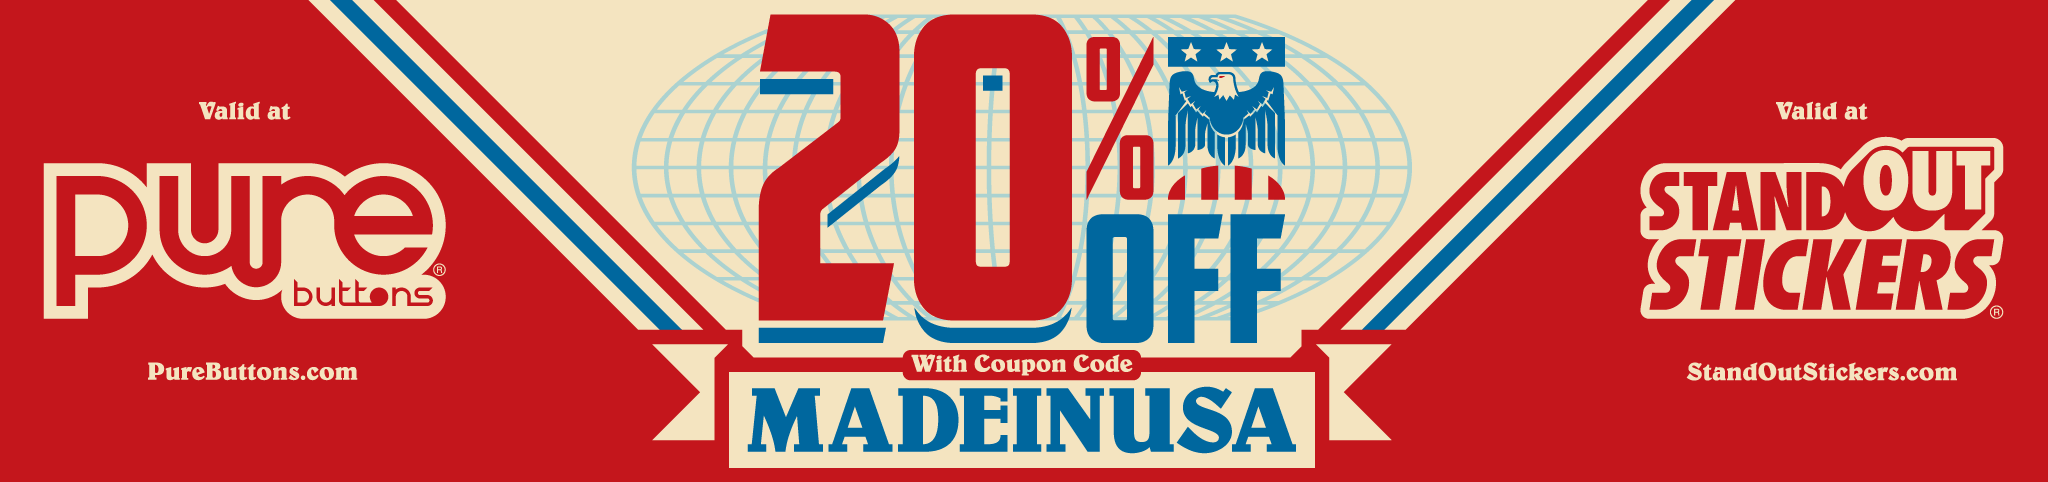 Take 20% OFF with code MADEINUSA at PureButtons.com and StandOutStickers.com